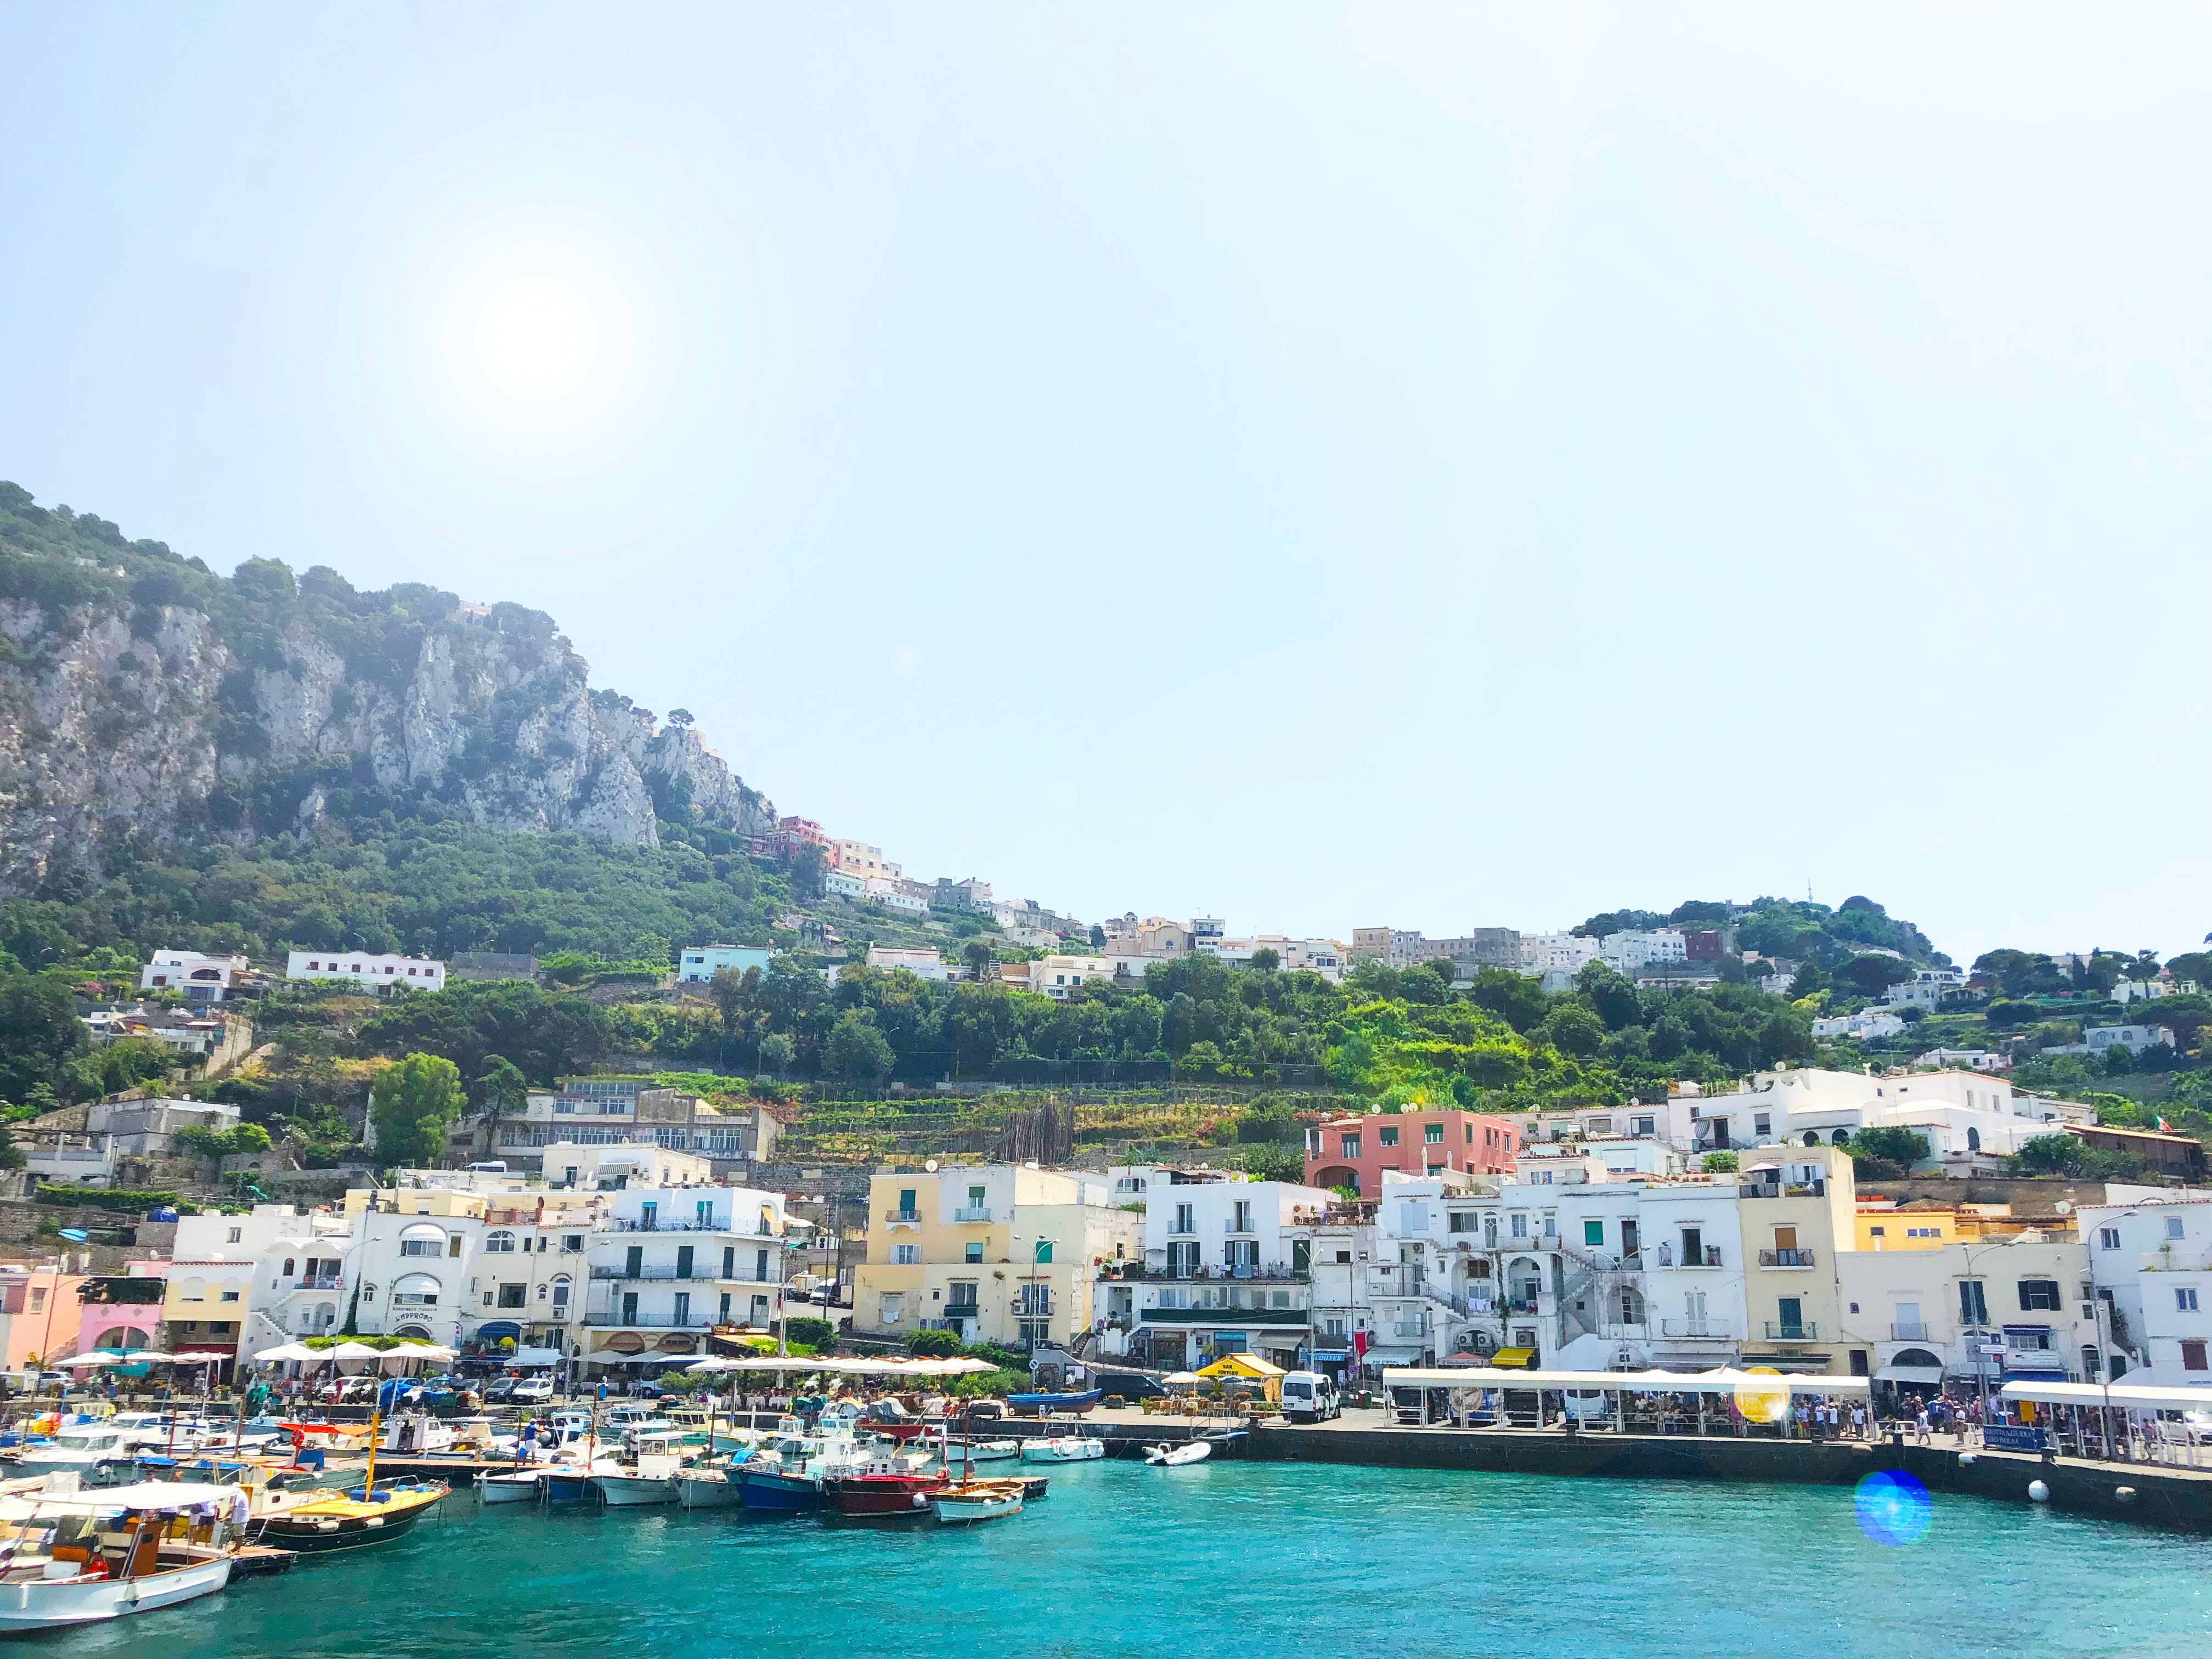 Capri 4K wallpaper for your desktop or mobile screen free and easy to download